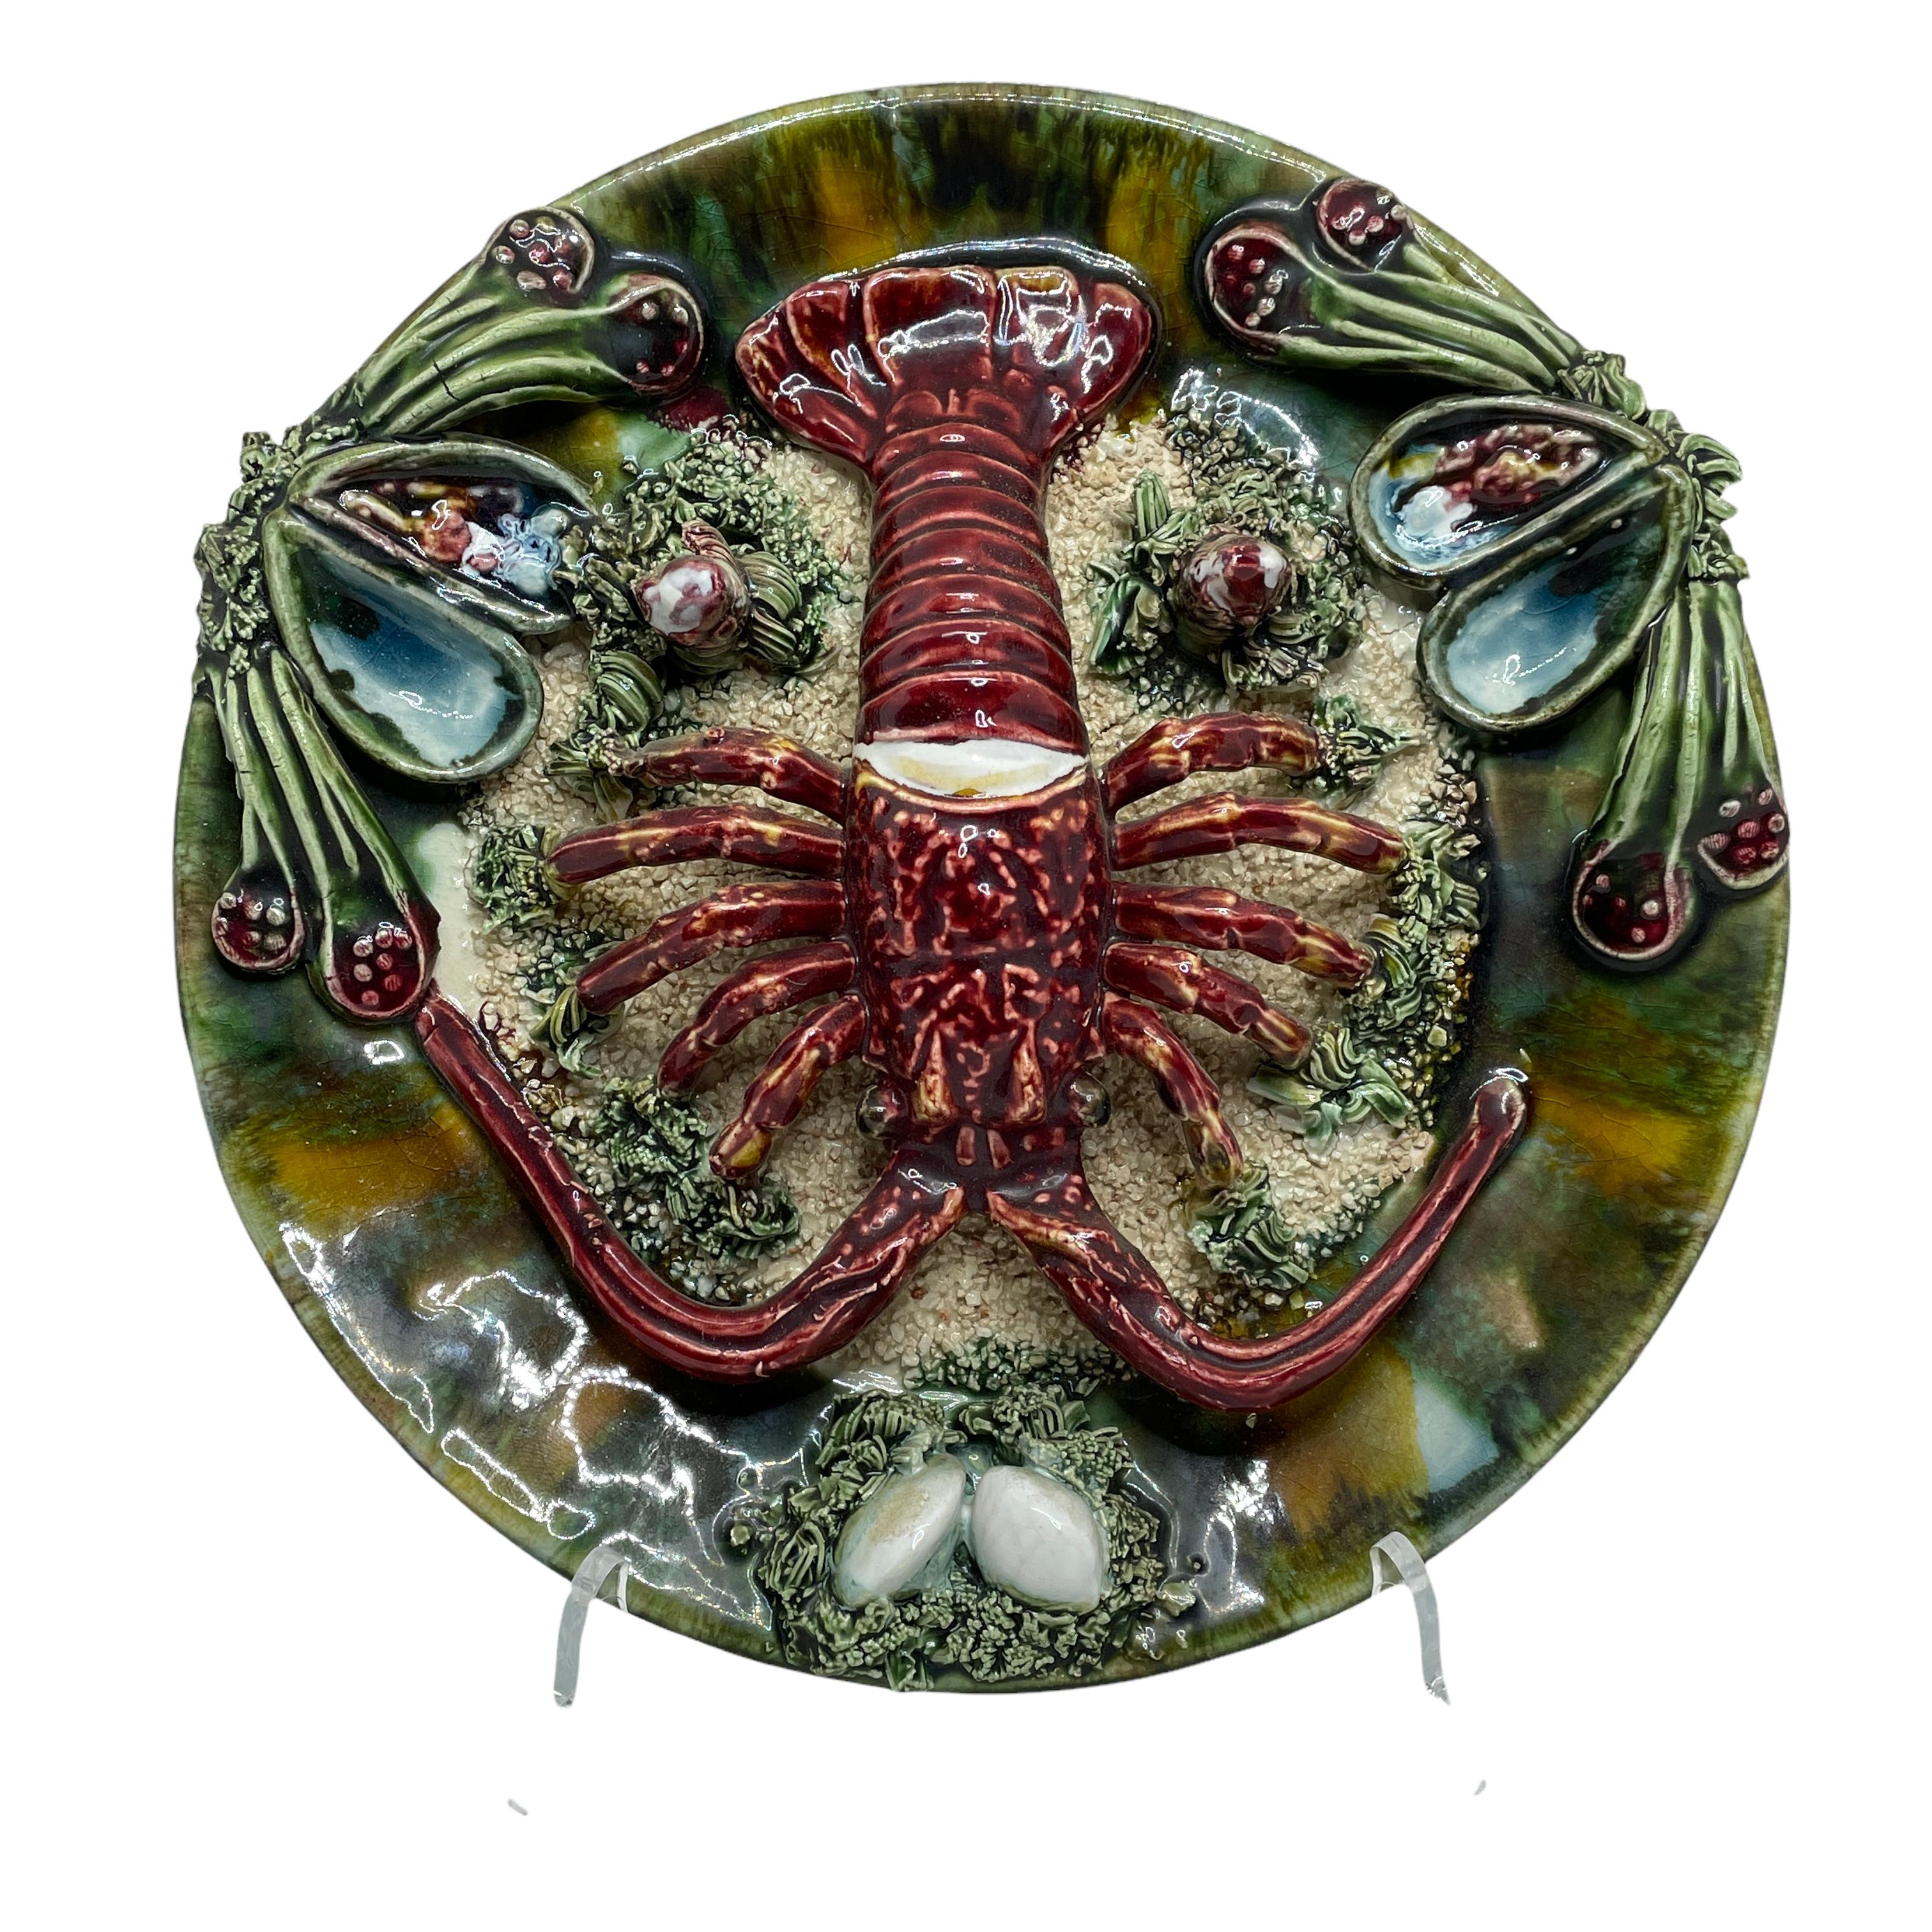 Portugese Caldas da Rainha Palissy lobster wall plaque plate, circa 1950s.
Decorated with mussels, shells and seaweed. Beautiful condition for this age. A beautiful piece of art for any room.